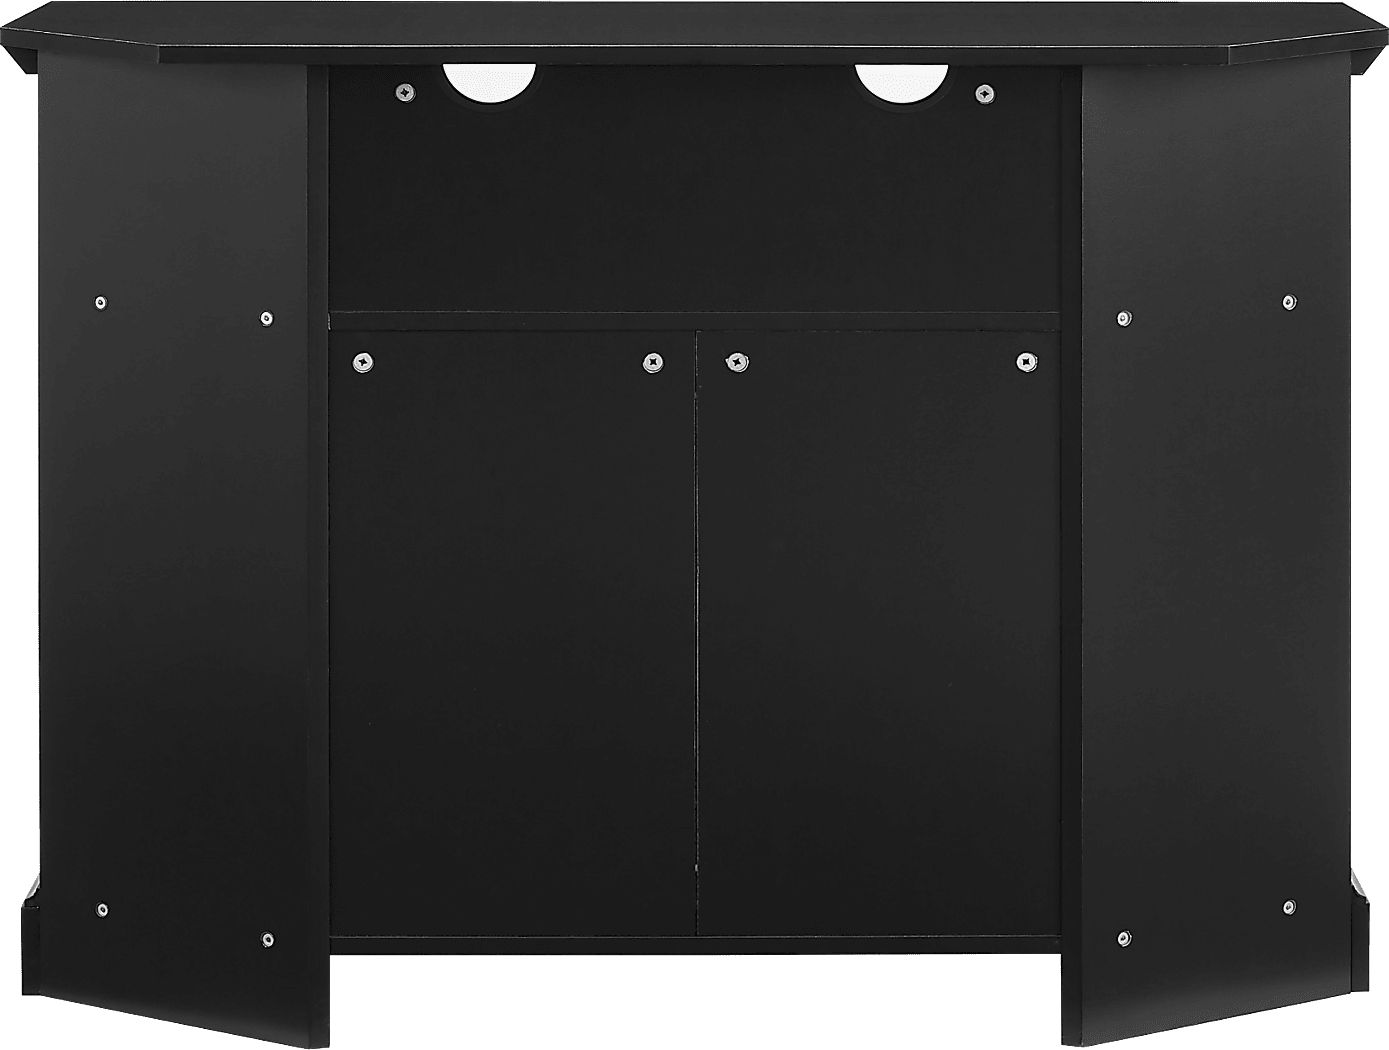 Beaconshope Black 44 in. Console